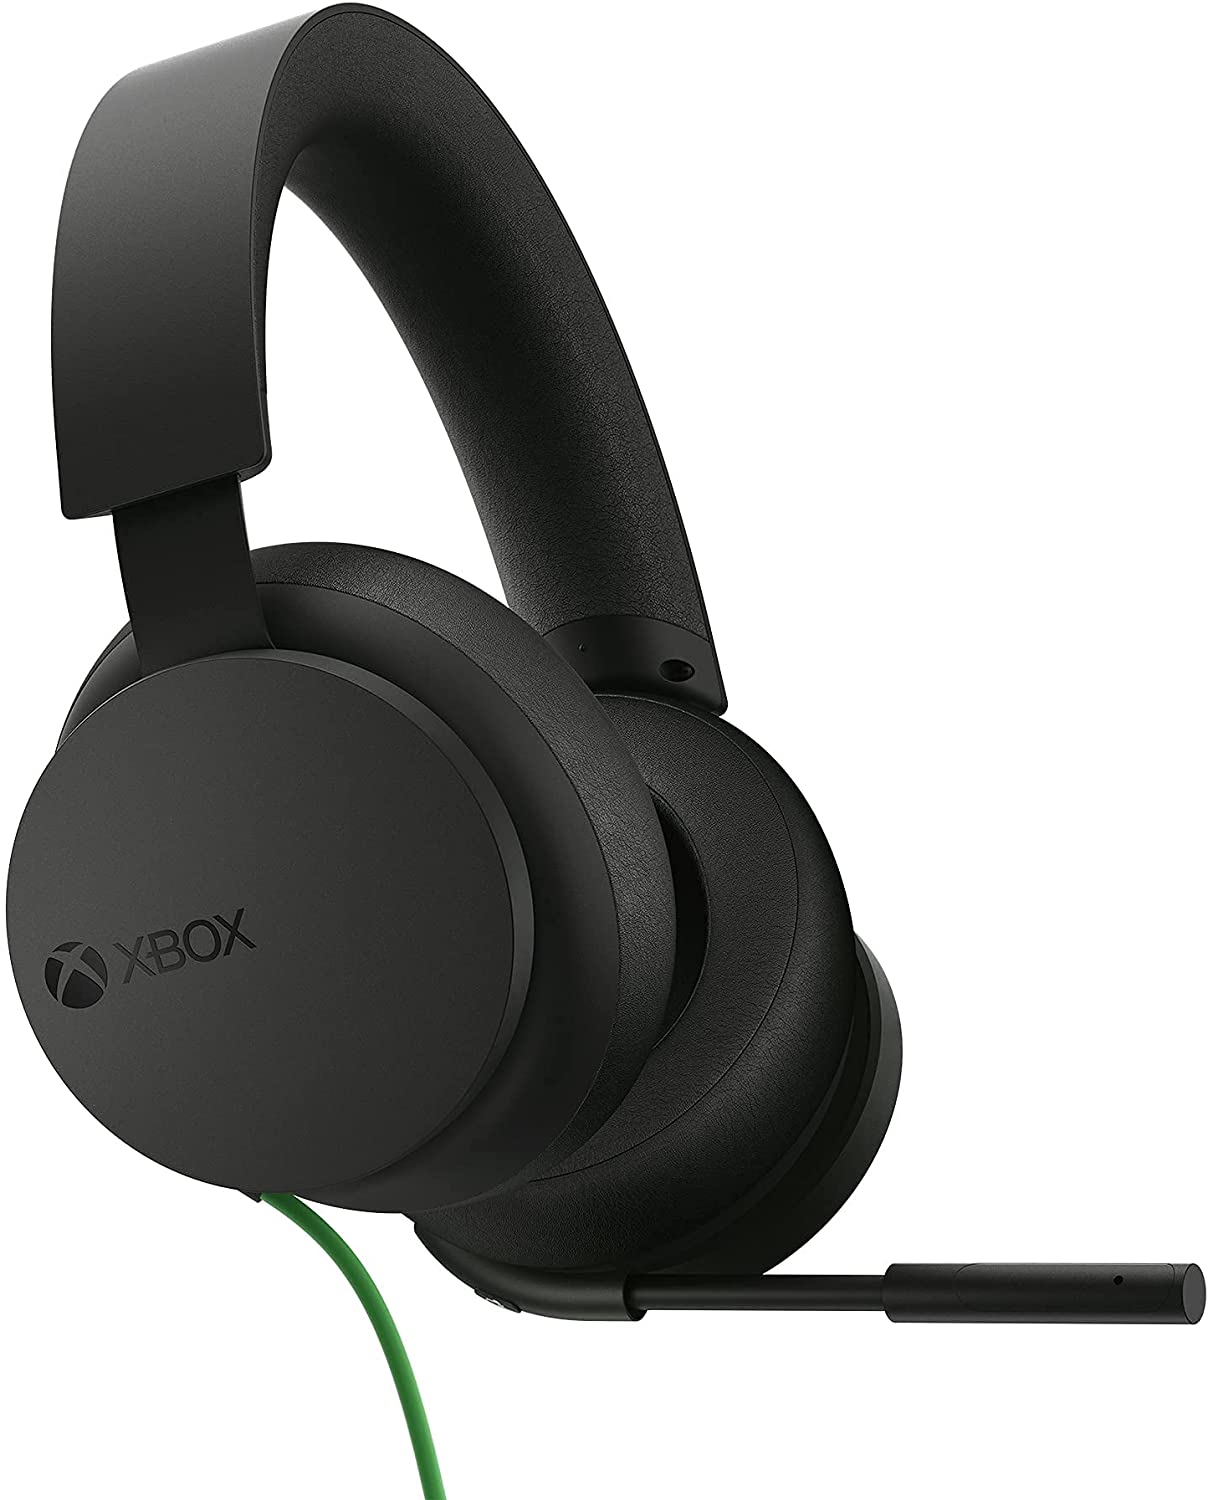 Microsoft Xbox Stereo On-Ear Wired Headphones w/Mic for Xbox/PC - Black (Certified Refurbished)